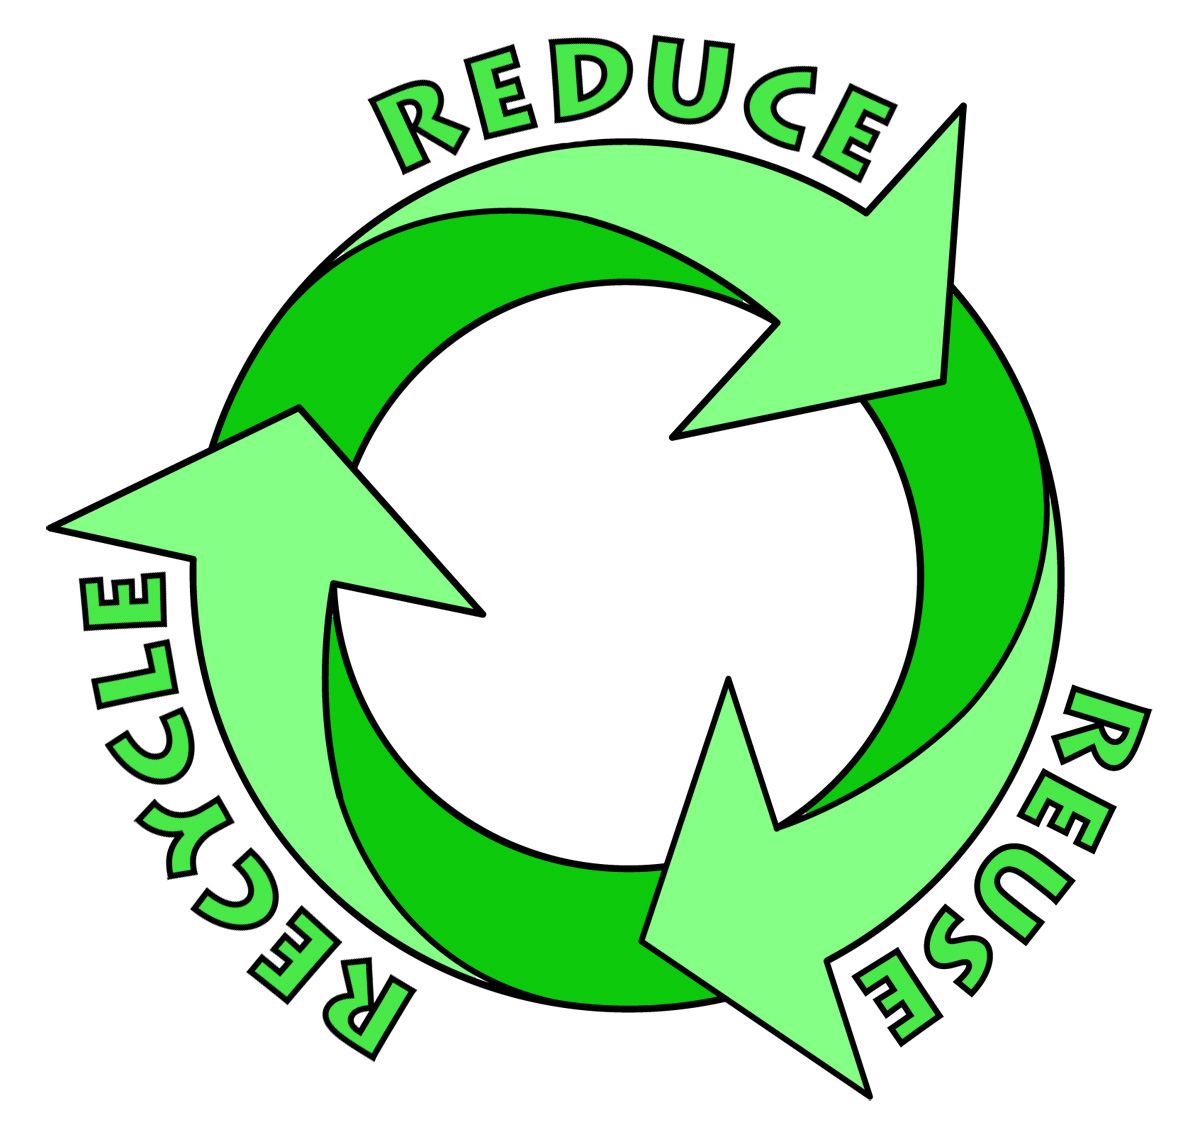 Rethink Recycling: reduce, recycle, reuse 